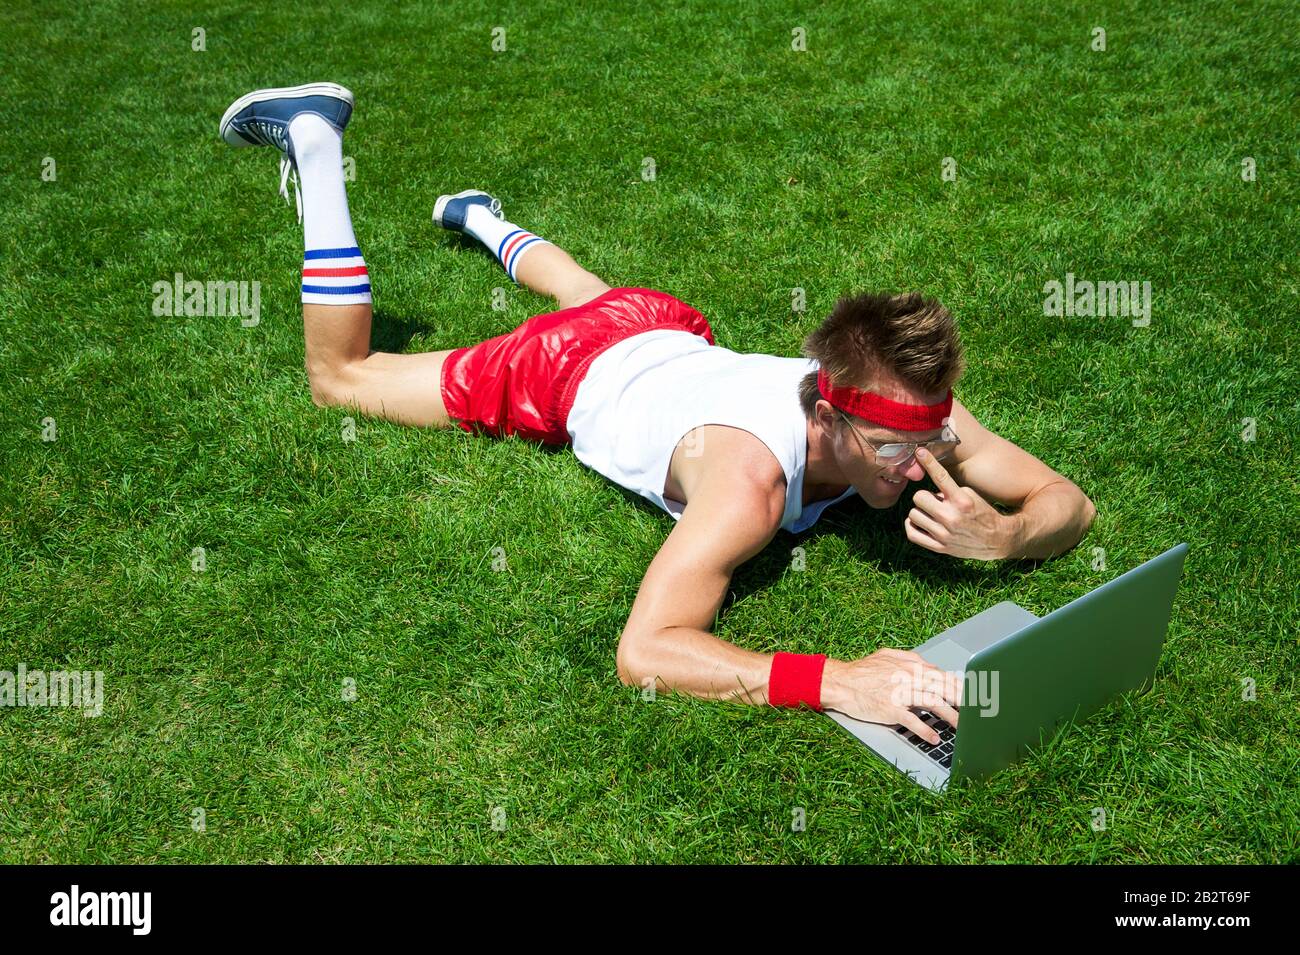 The Computer as an Athlete